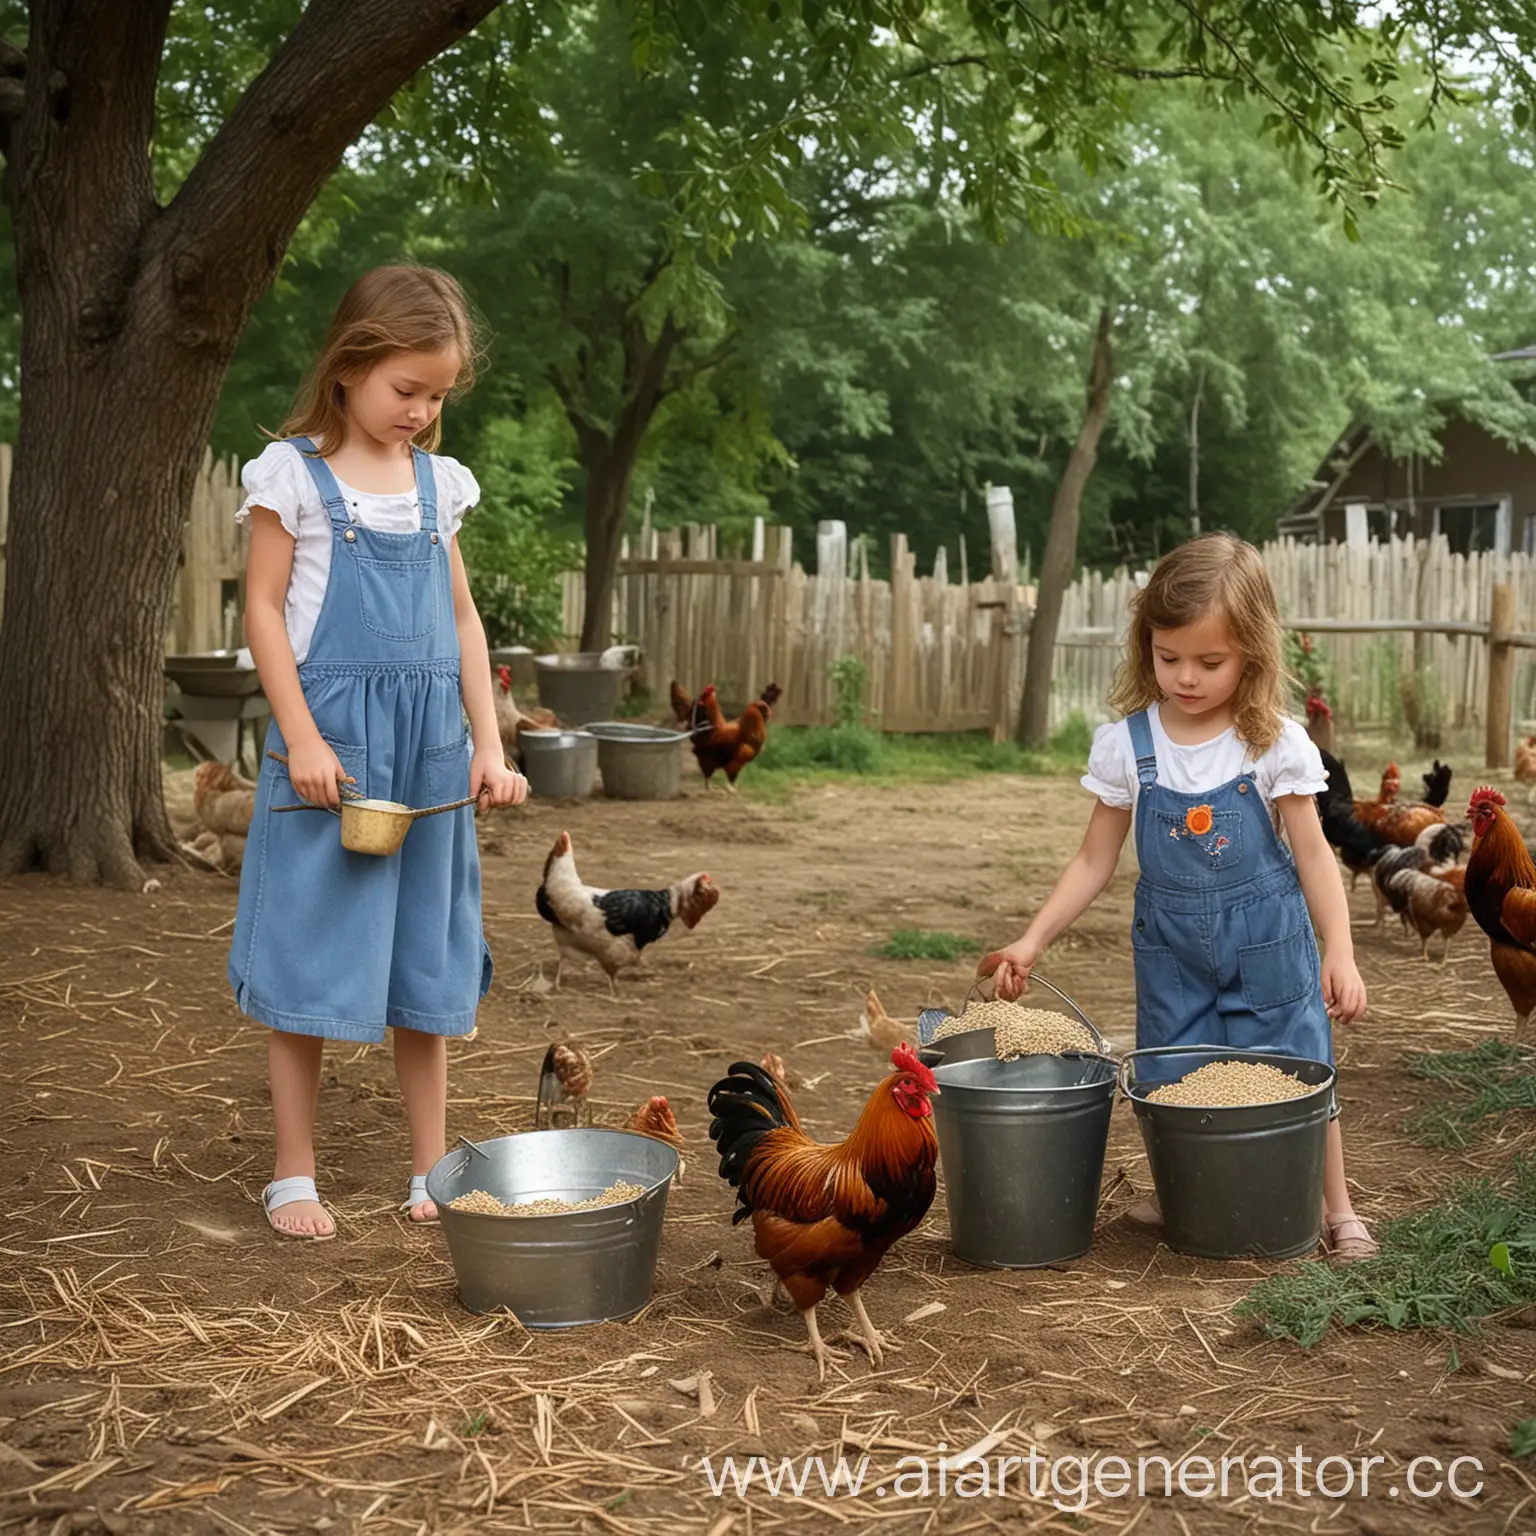 Summer-Village-Scene-Children-Feeding-Hens-and-Rooster-in-the-Yard